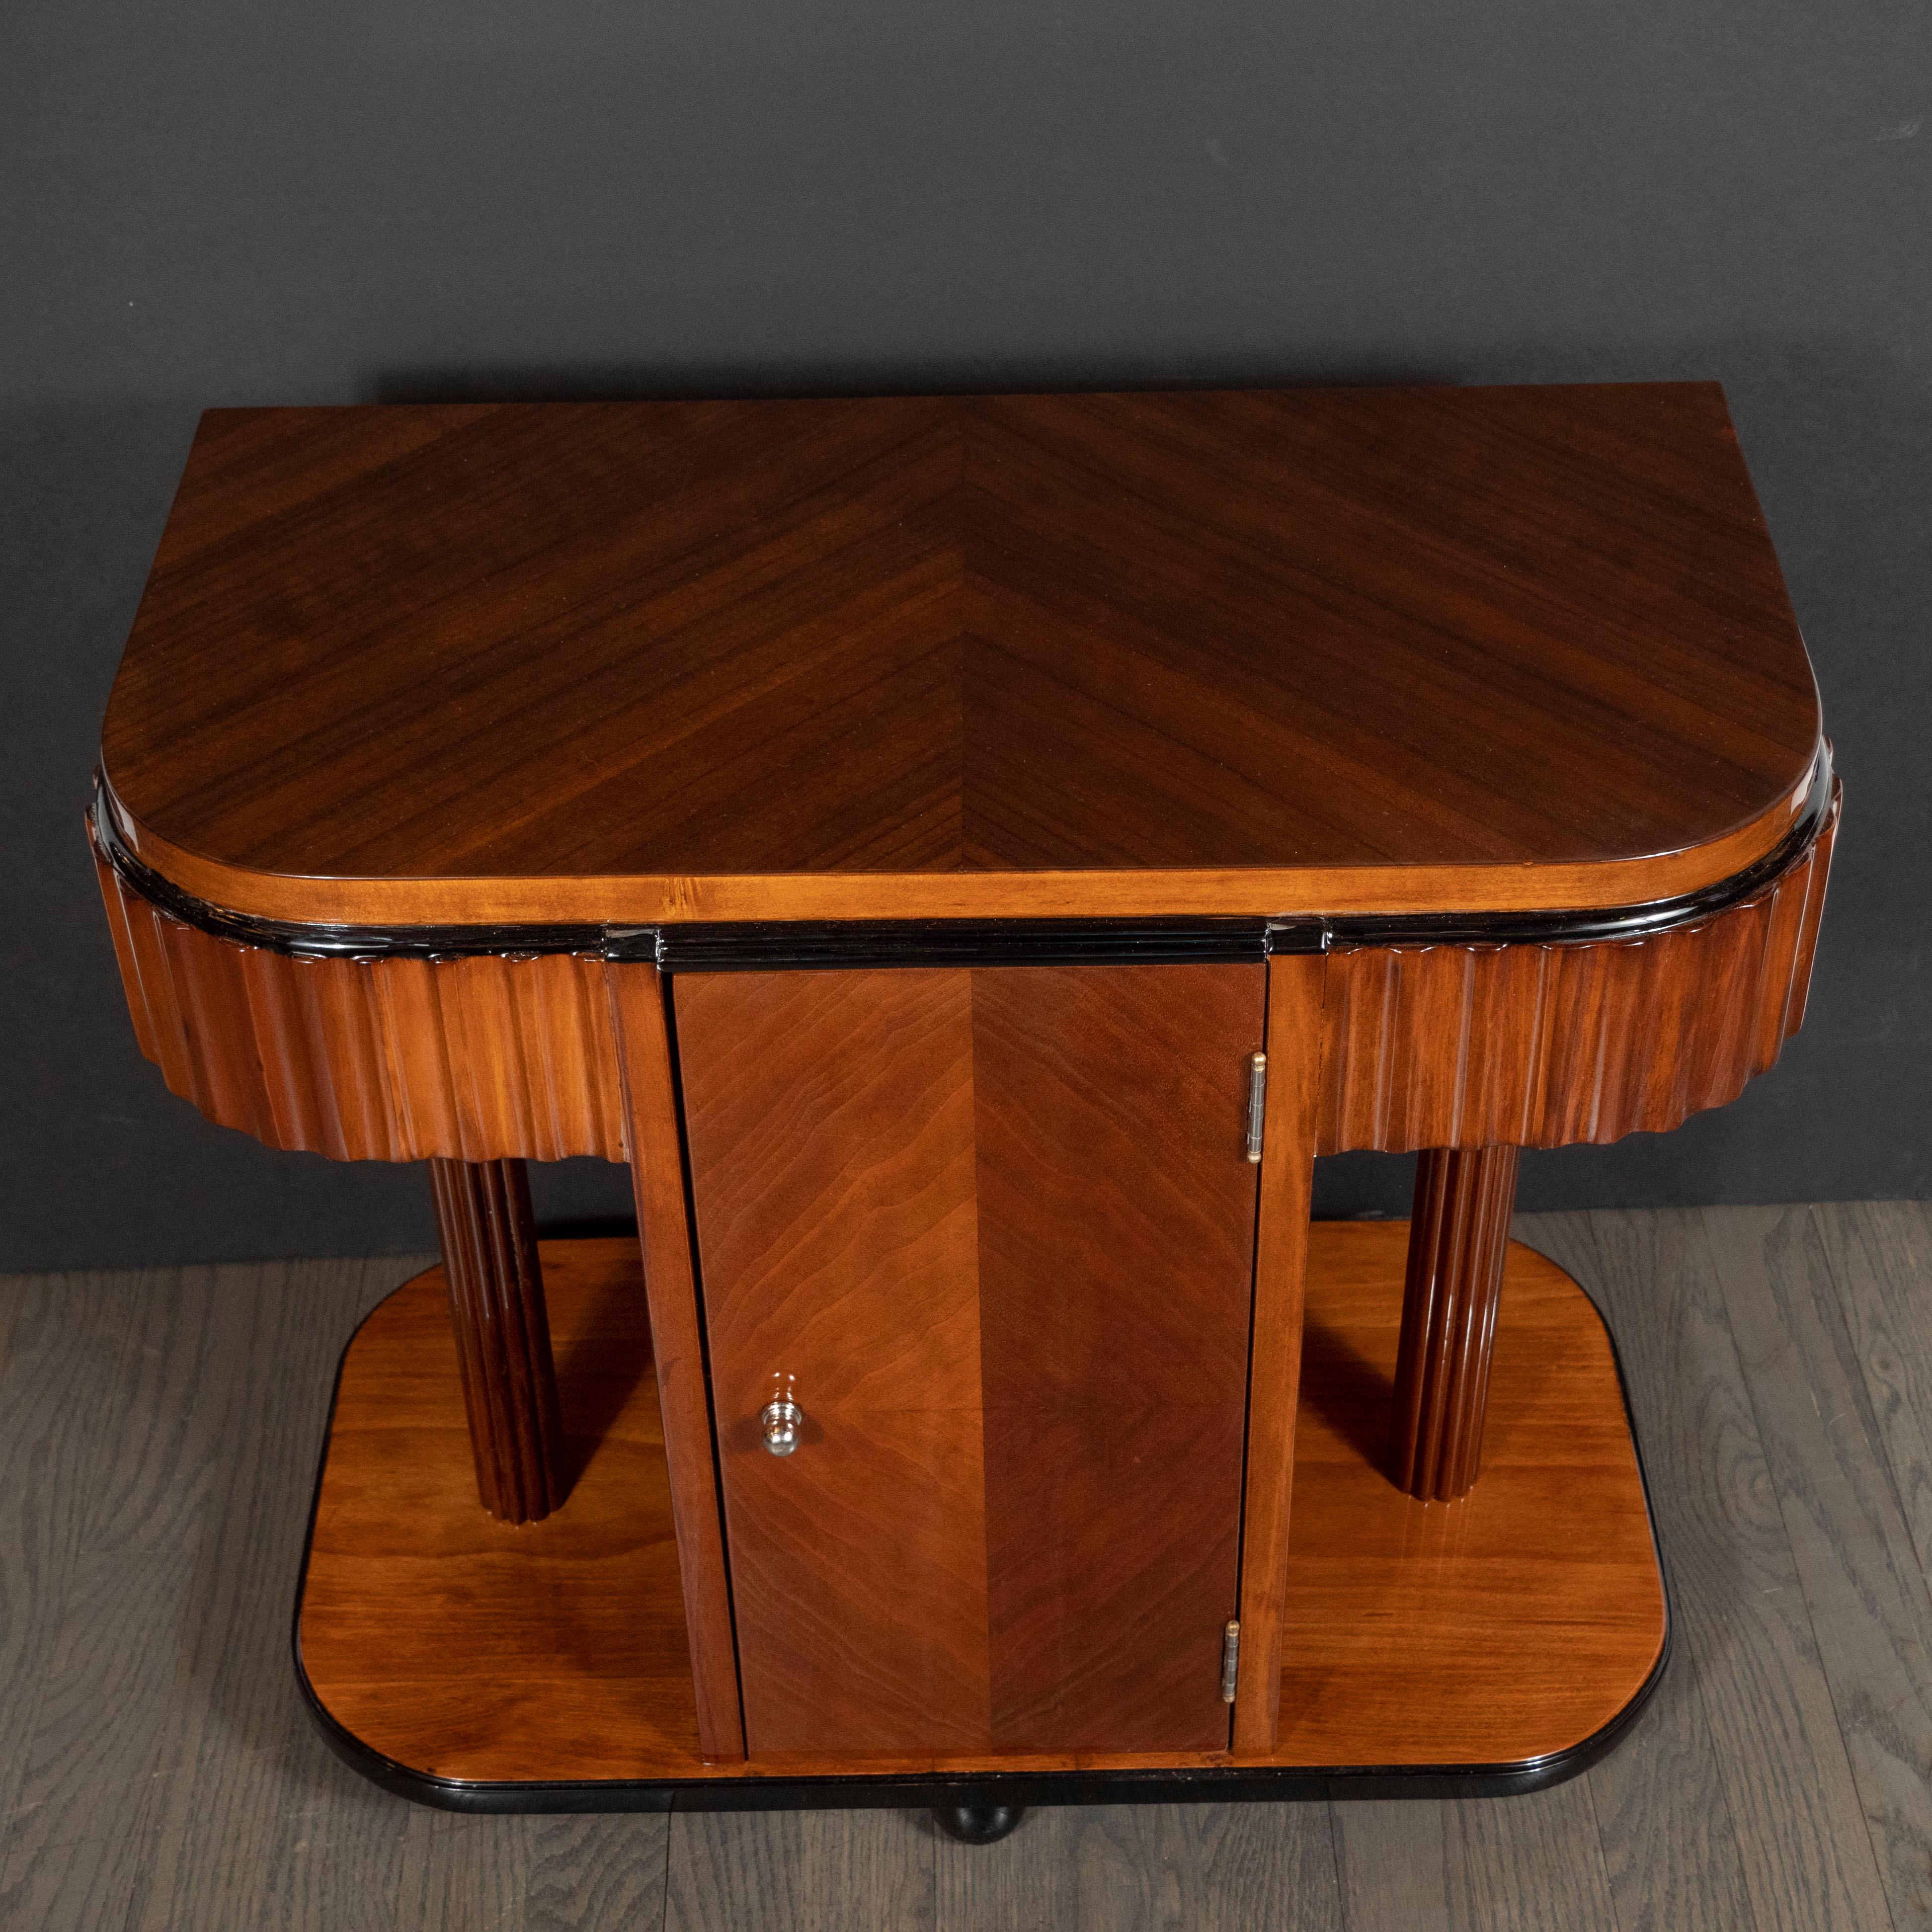 This stunning pair of Art Deco Machine Age end tables or nightstands were realized in the United States circa 1935. They feature skyscraper style walnut tops (with black lacquer banding) whose grain has been bookmatched to create a stunning